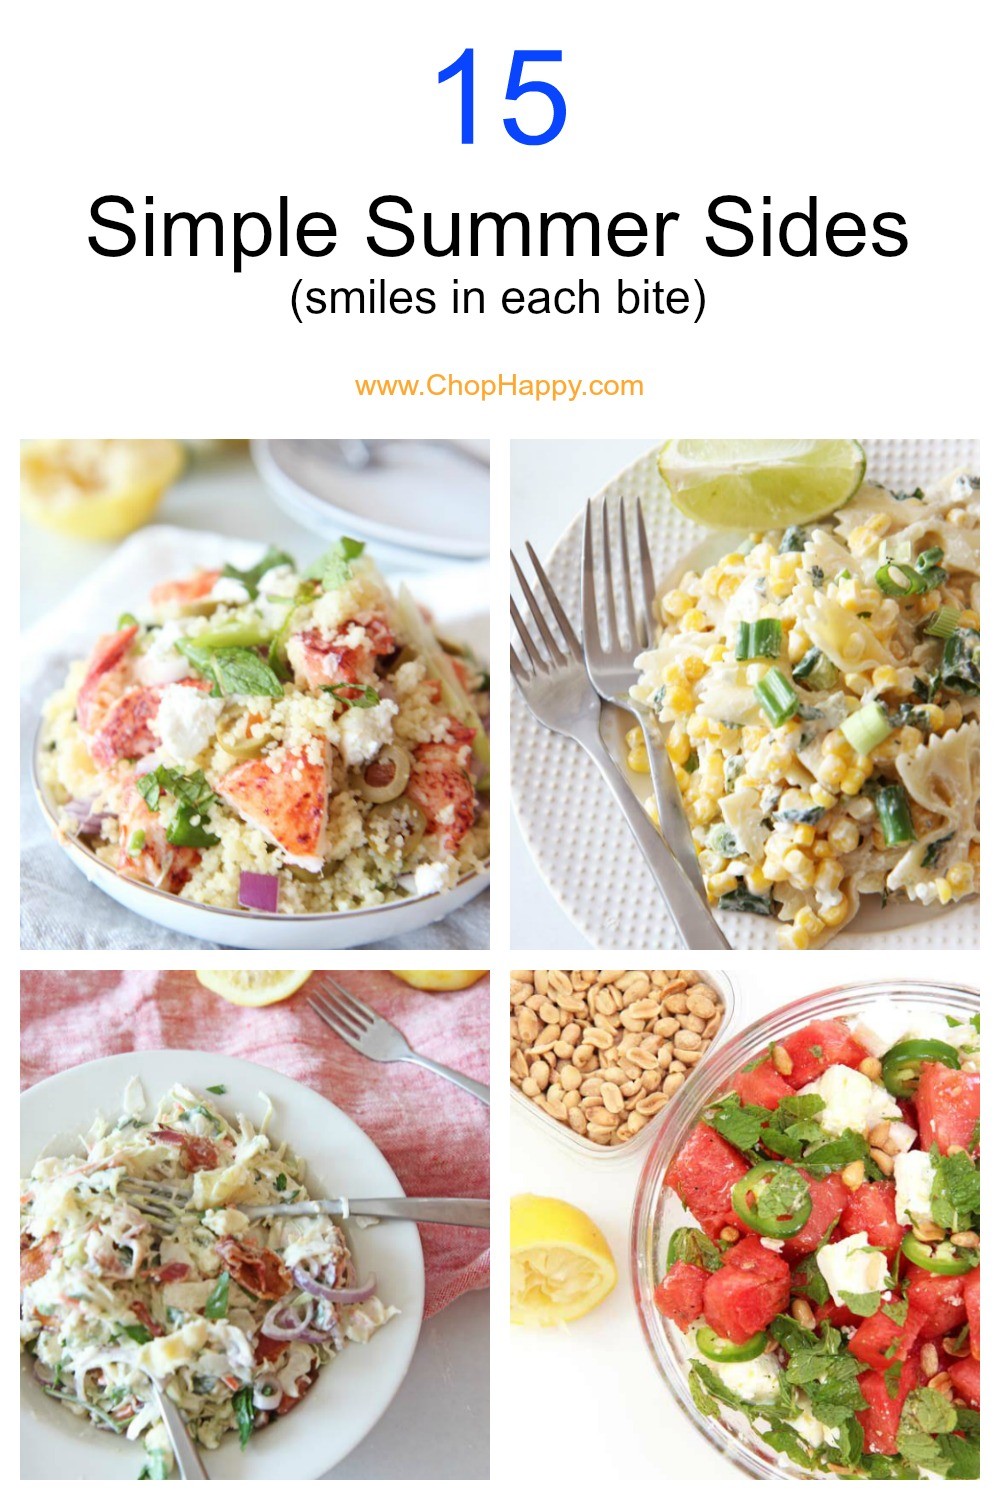 15 Simple Summer Sides (smiles in each bite)